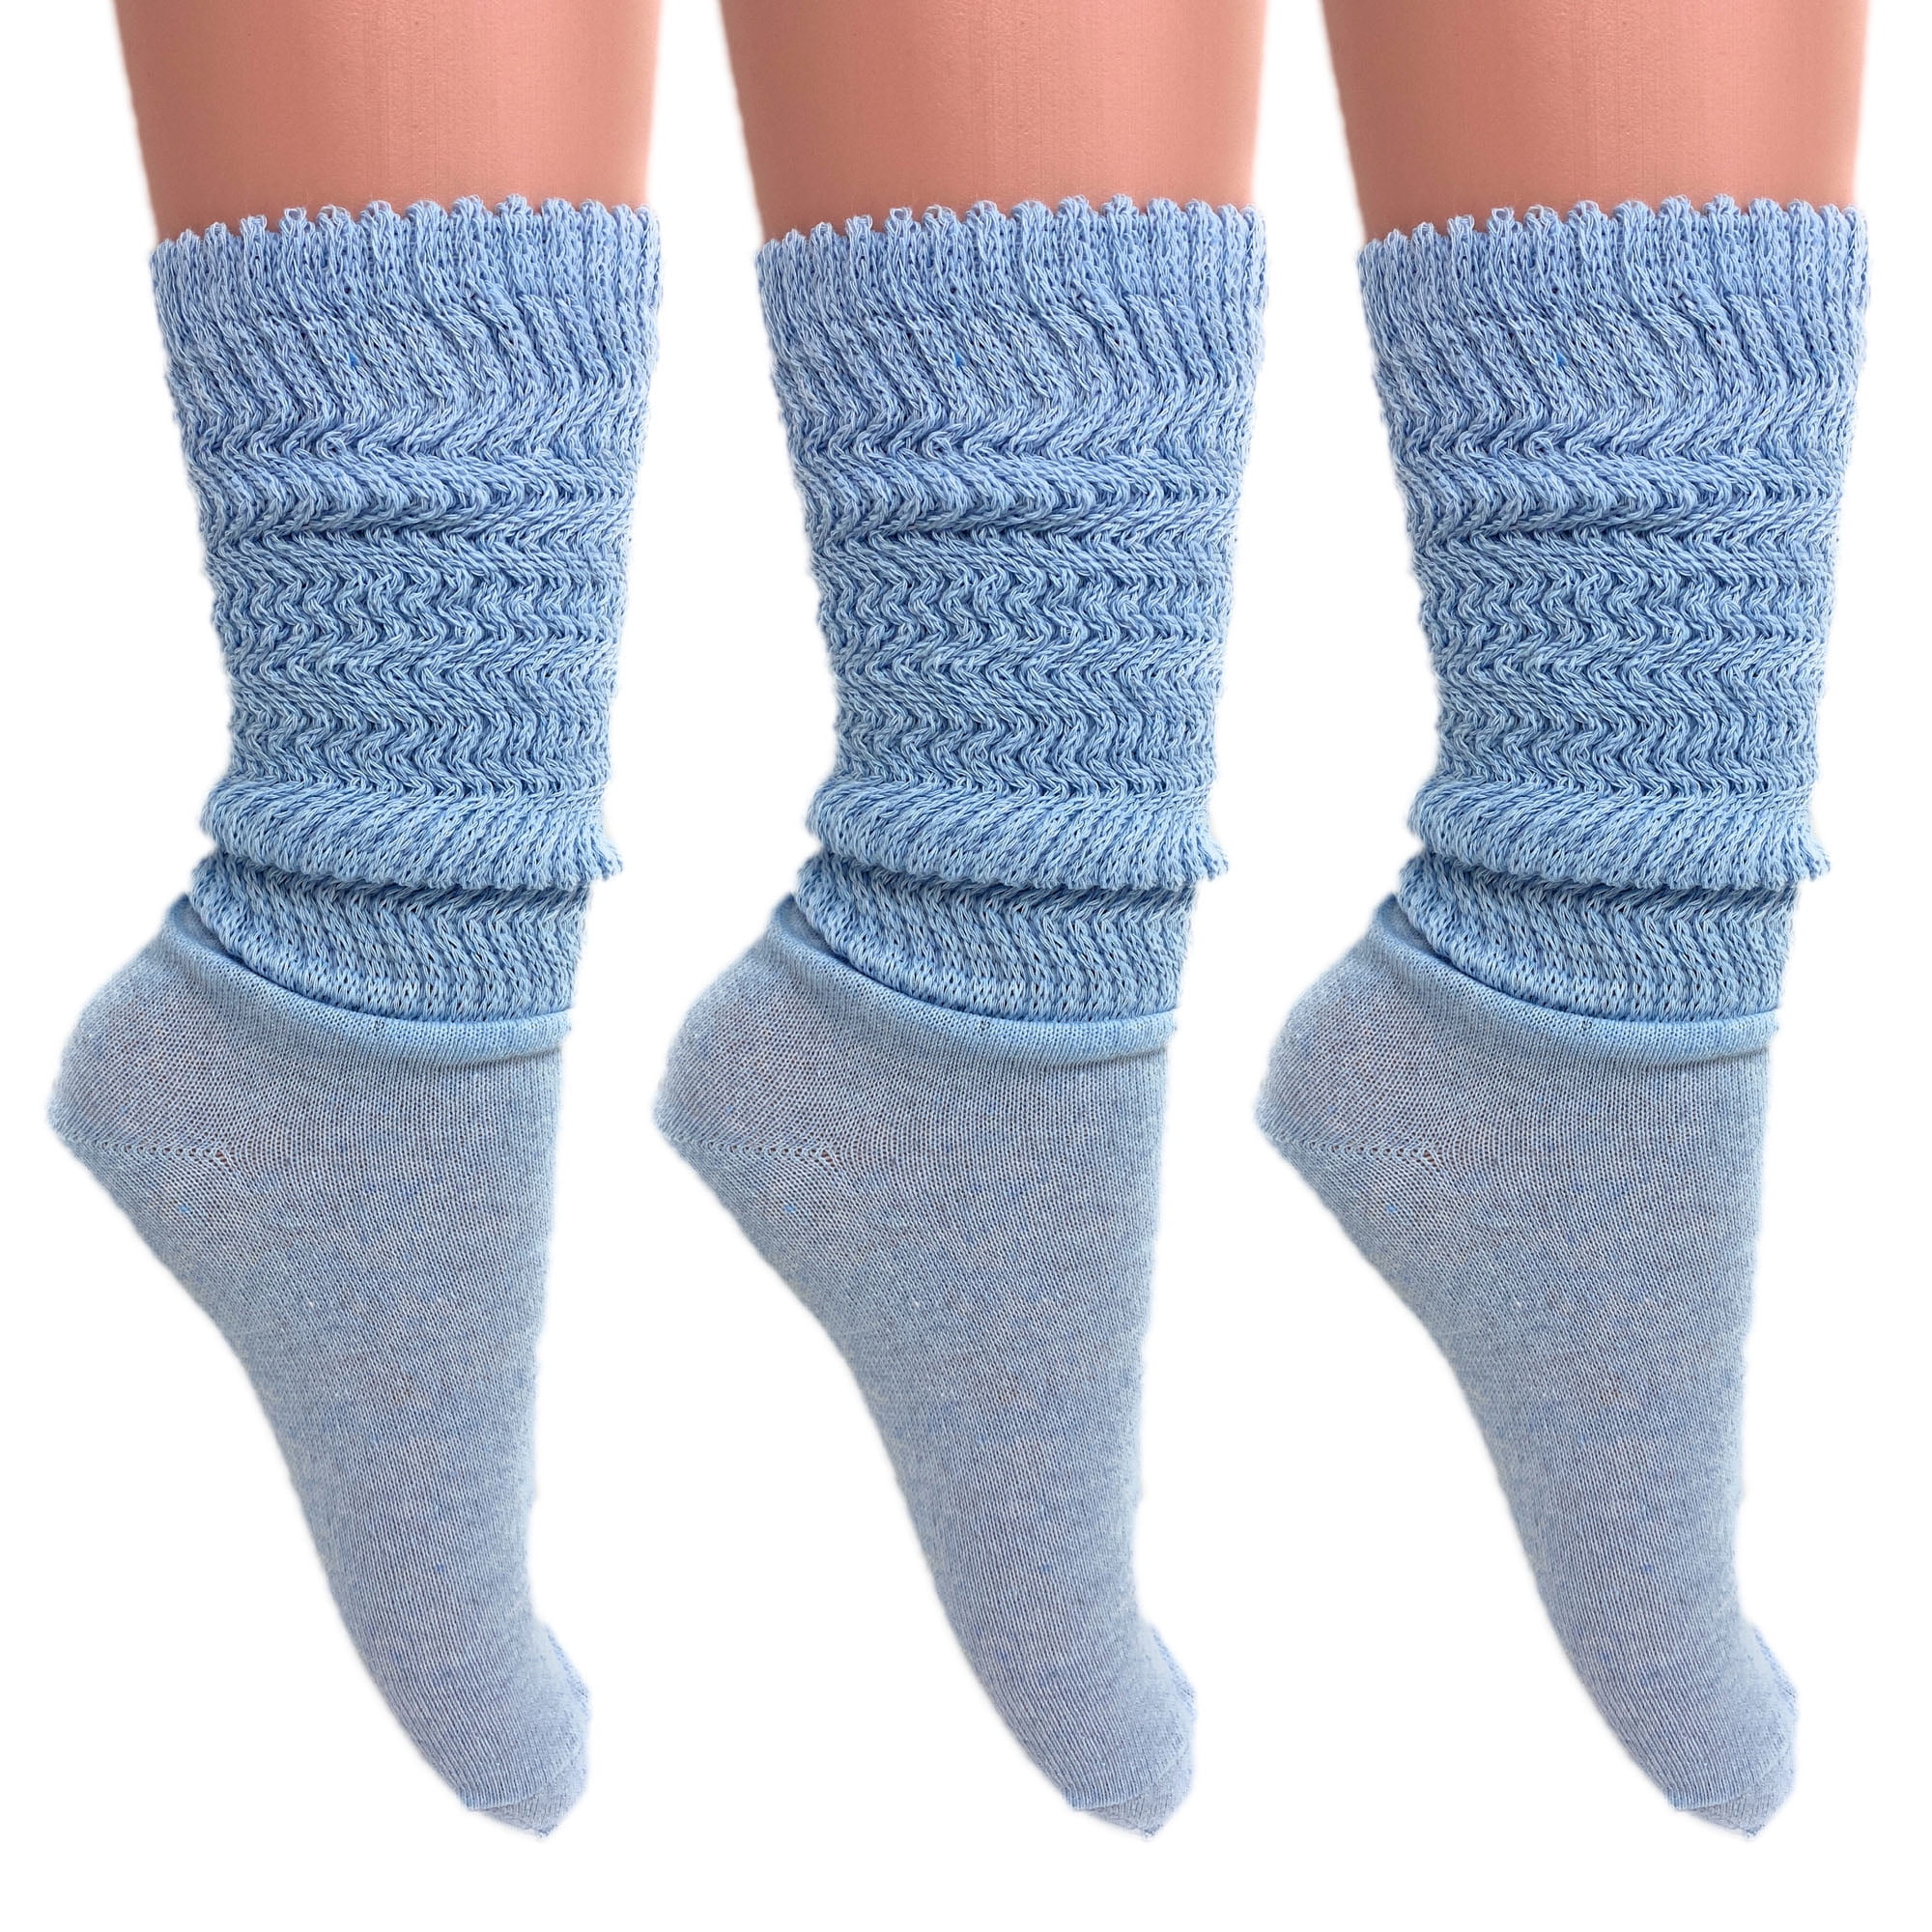 Lightweight Slouch Socks For Women Extra Thin Light Blue Cotton Socks 3 Pairs Size 9 11